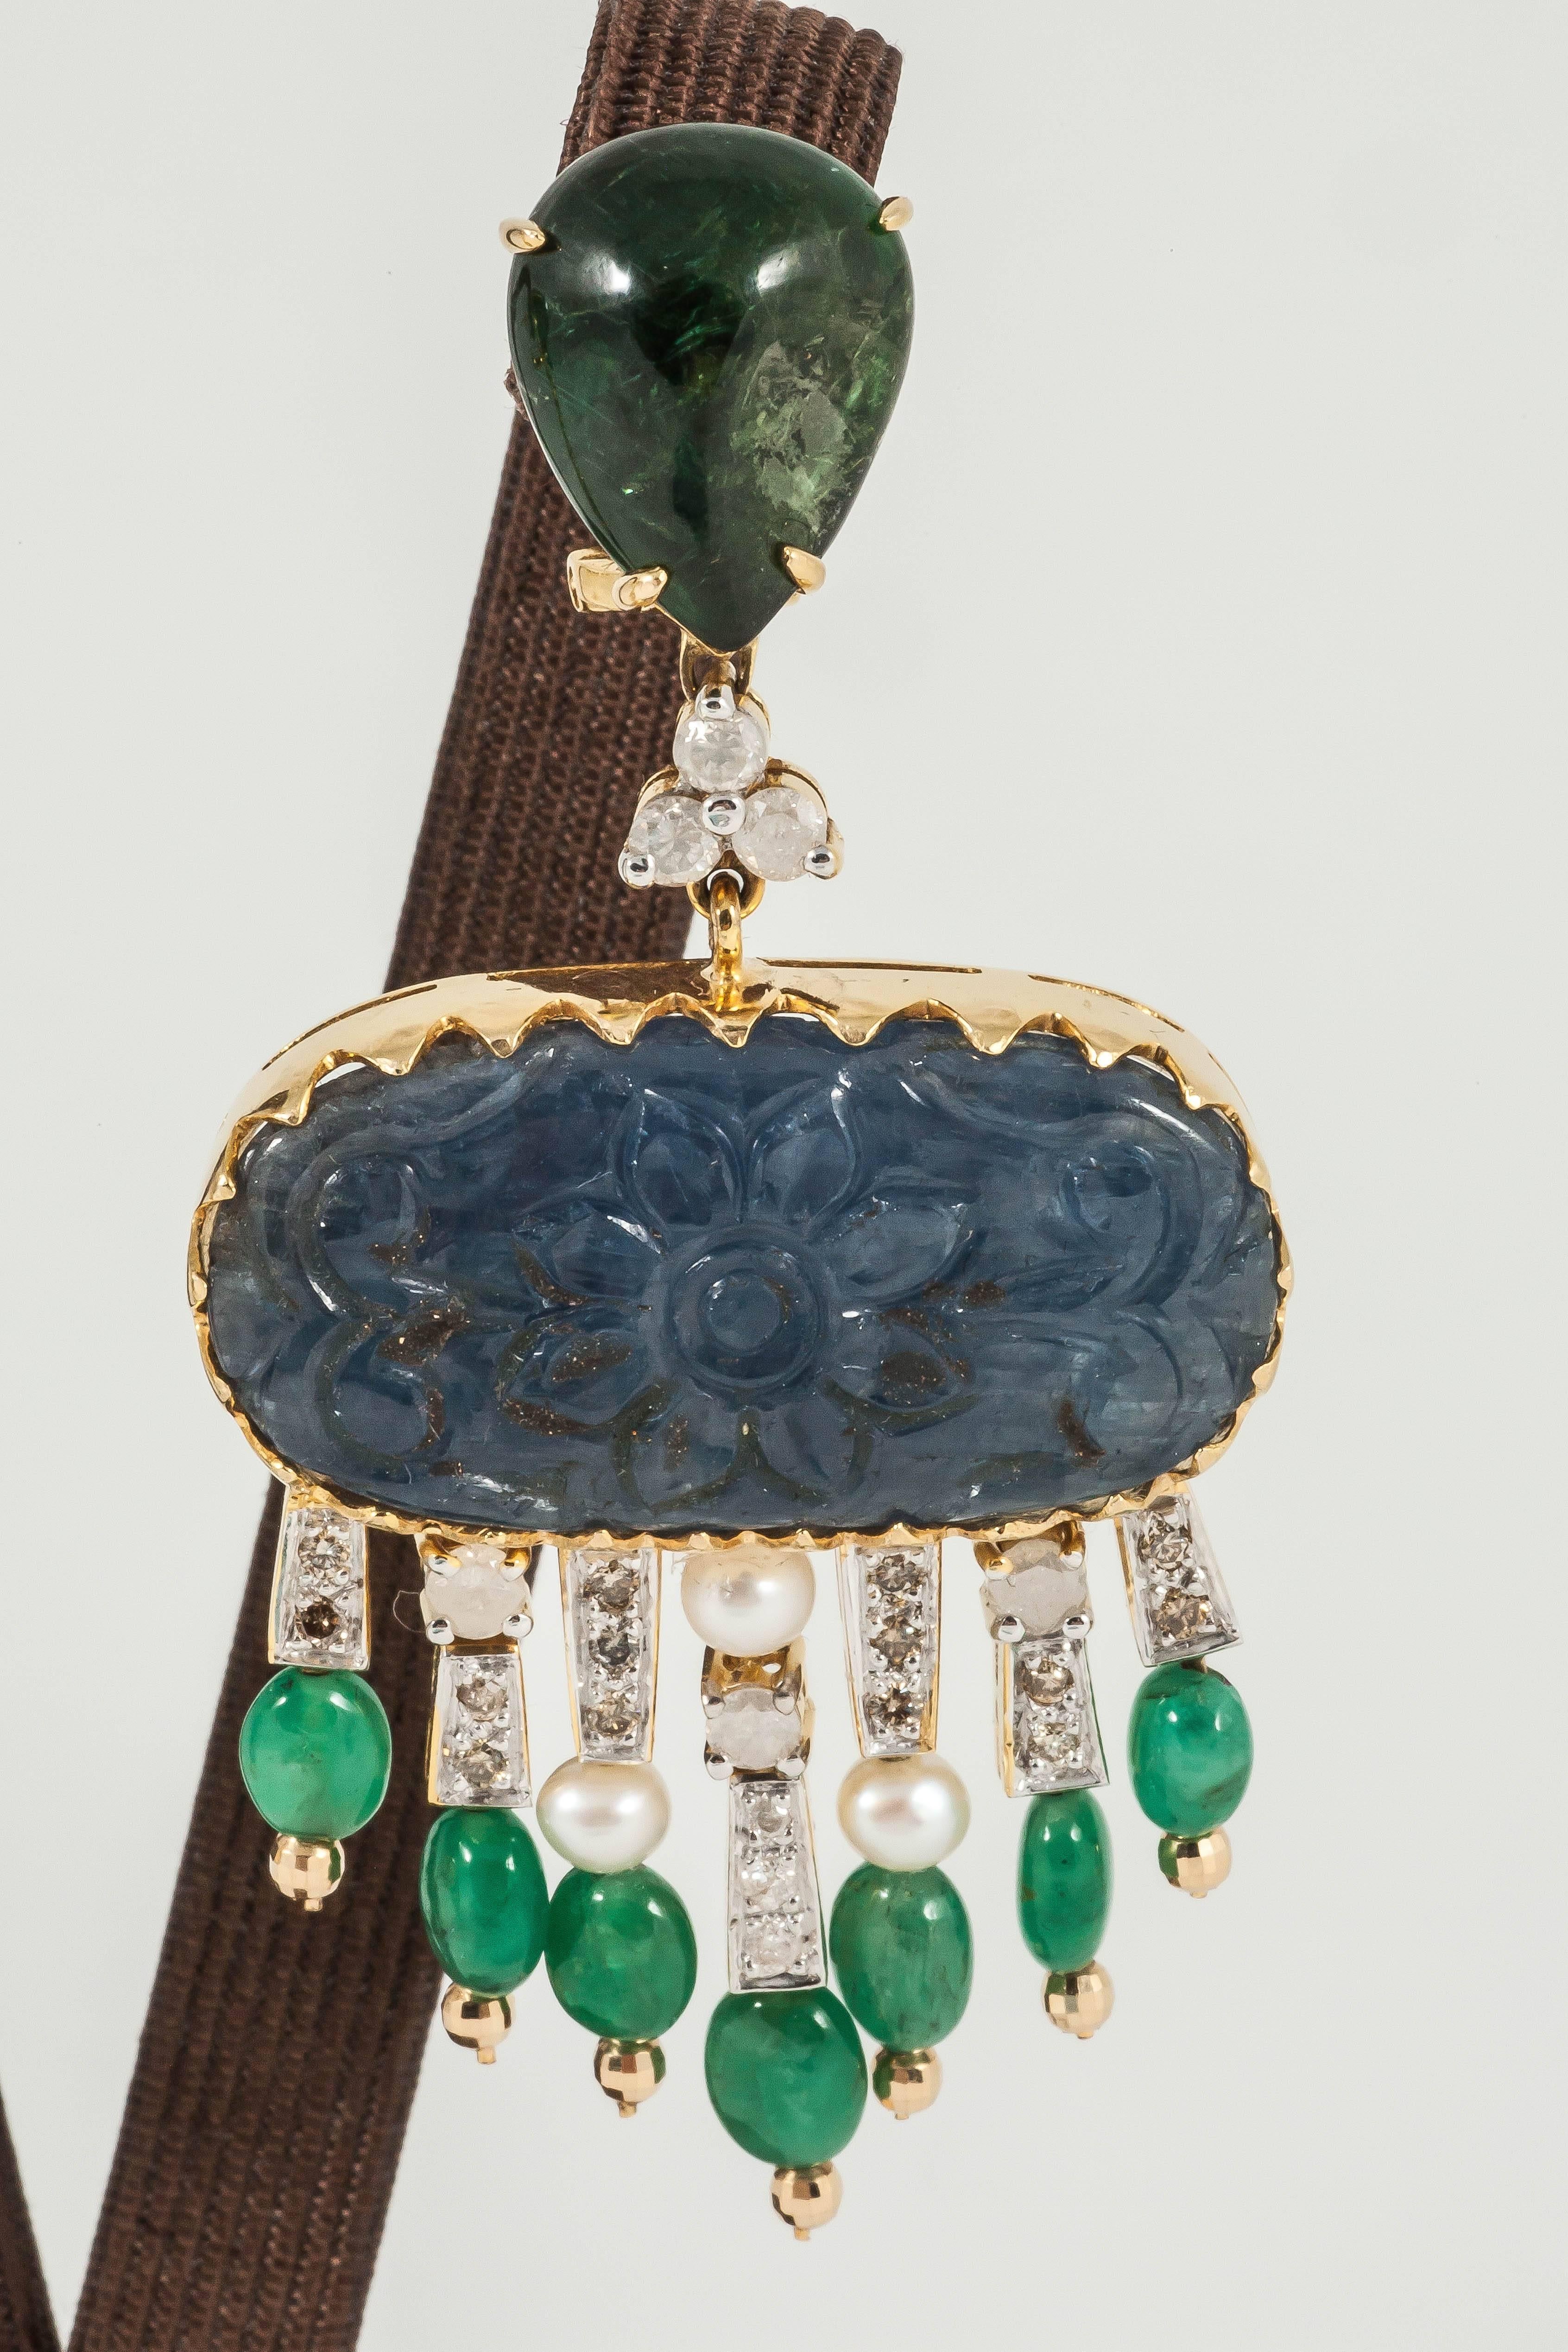 Carved blue Sapphire earrings adorned with Green Tourmaline  along with Diamond and Emerald drop tassels

18K White Gold: 22.7gms
Carved Sapphire: 44.54cts
Turmoline: 7cts
Diamond: 1.45cts
Emerald drop: 8.85cts
Pearl: 6pcs